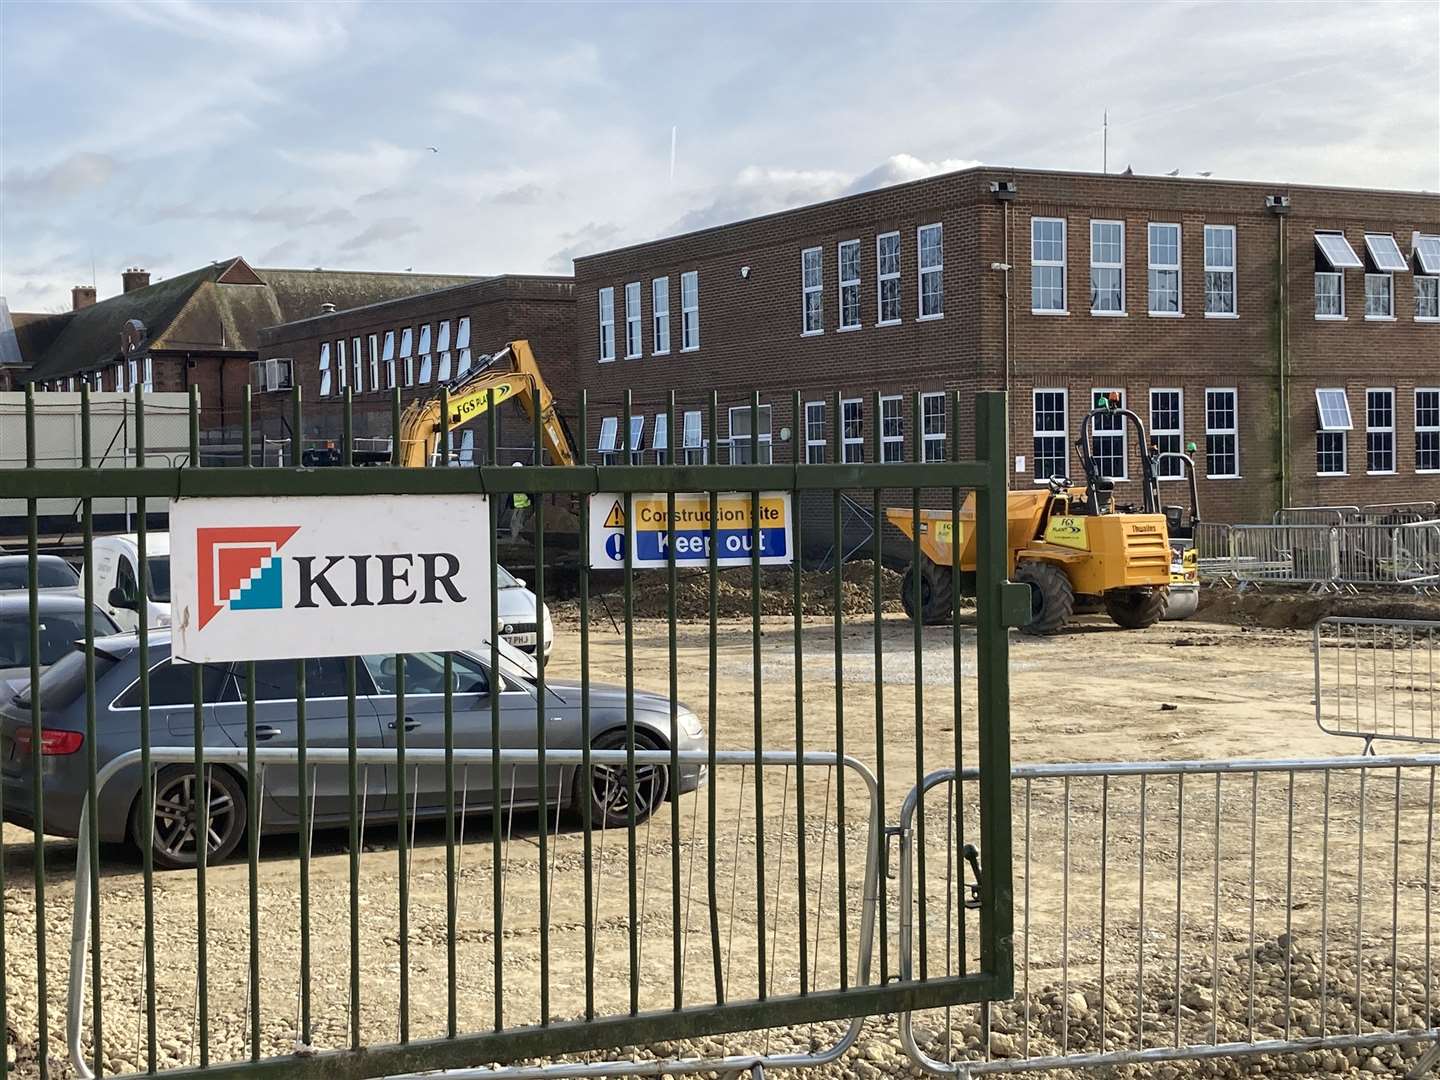 Diggers from construction company Kier have begun work on new classrooms at Borden Grammar School for Boys in Sittingbourne. It is expected to take at least a year